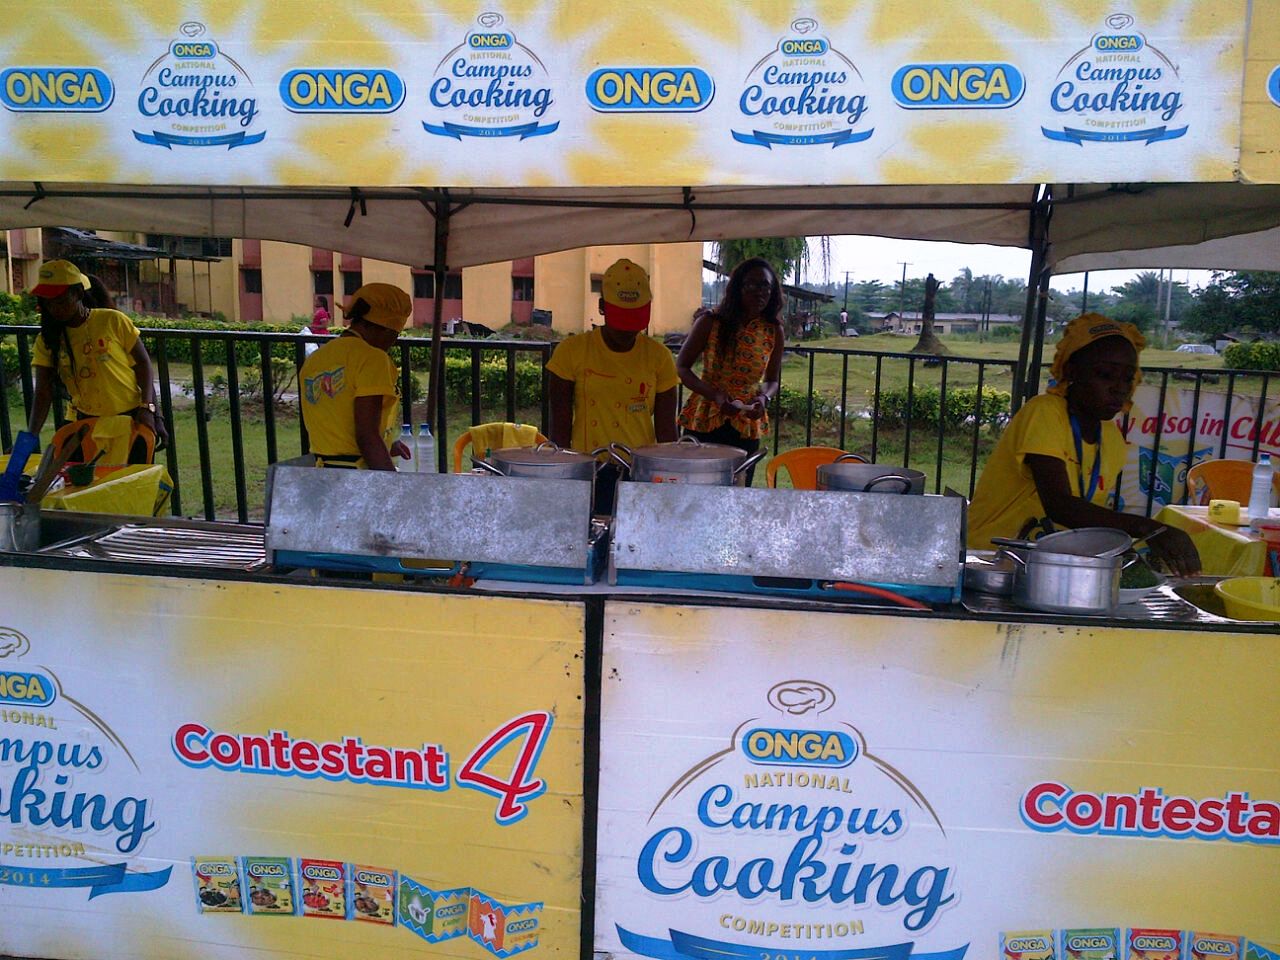 Contestants displaying their culinary skills